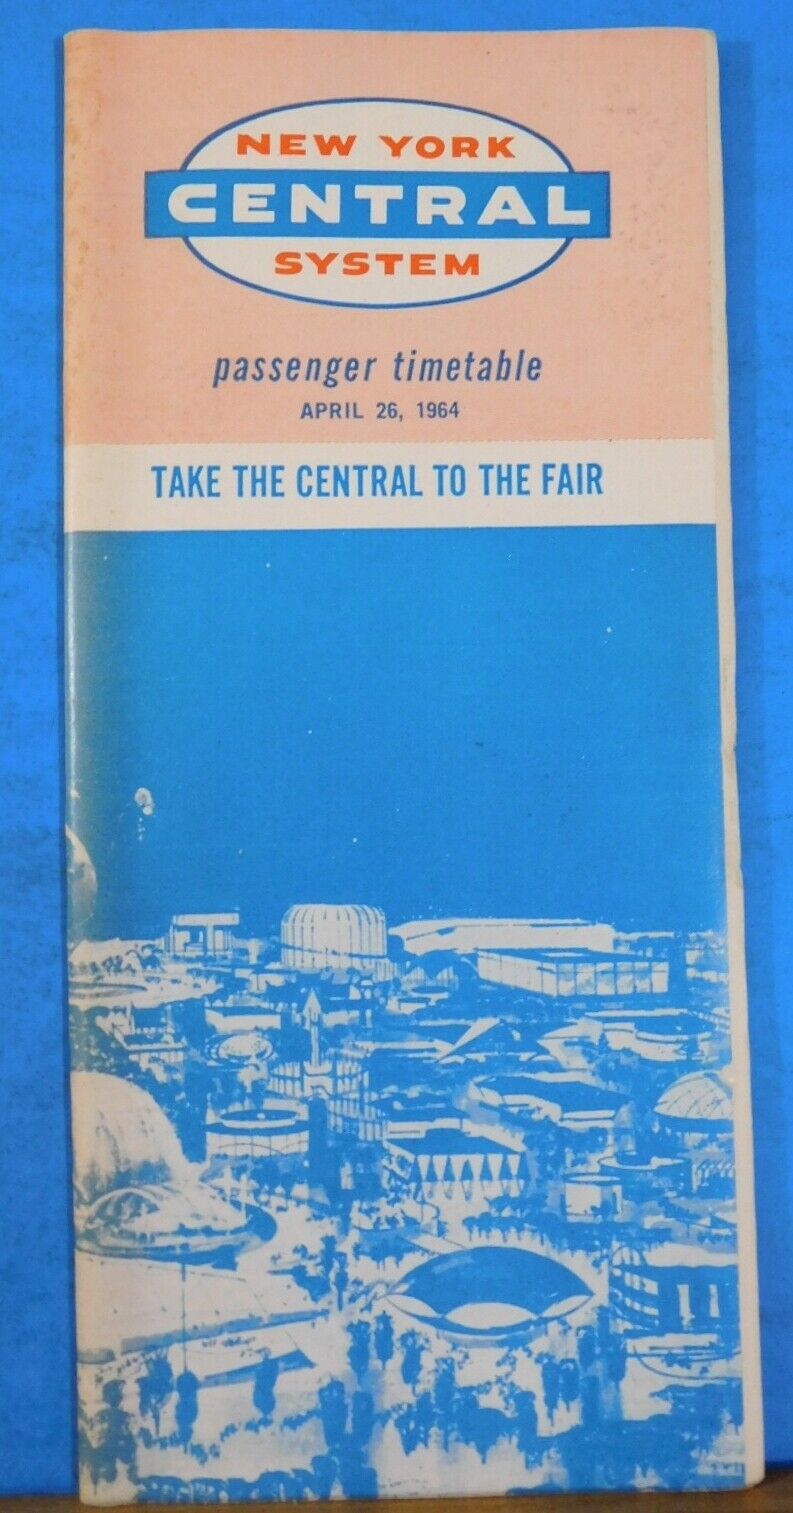 New York Central System Public Timetable 1964 April 26 Take Central to the Fair